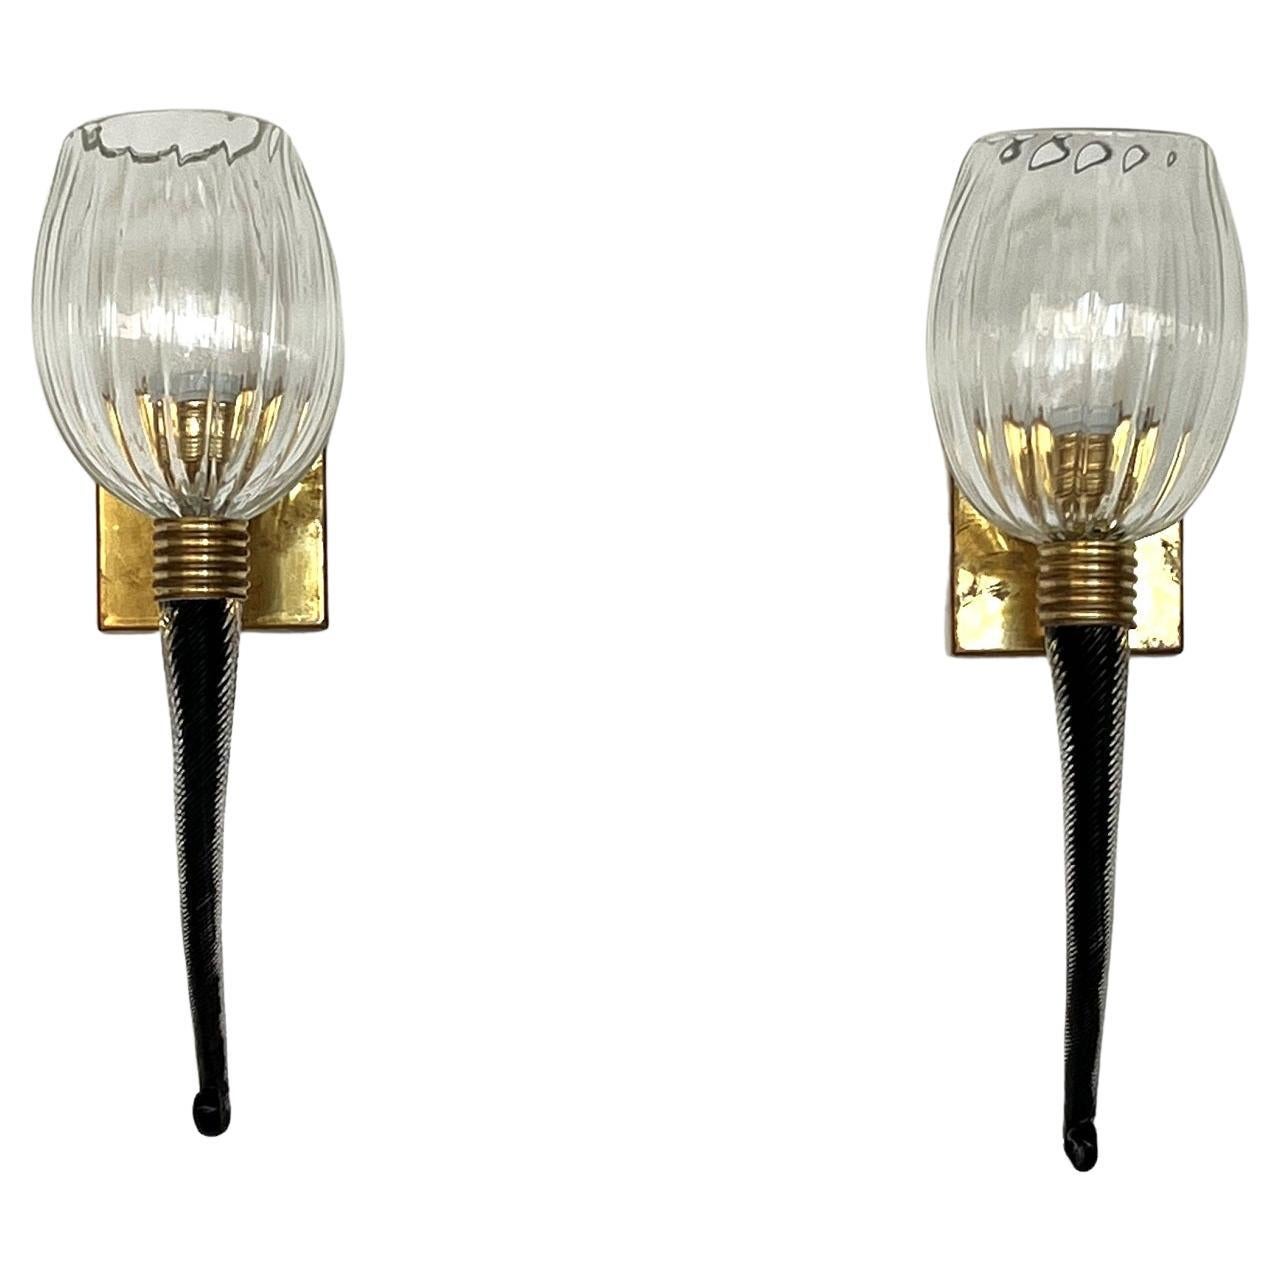 Italian Large Murano Glass Wall Lights or Sconces in Barovier Toso Style, 1990s For Sale